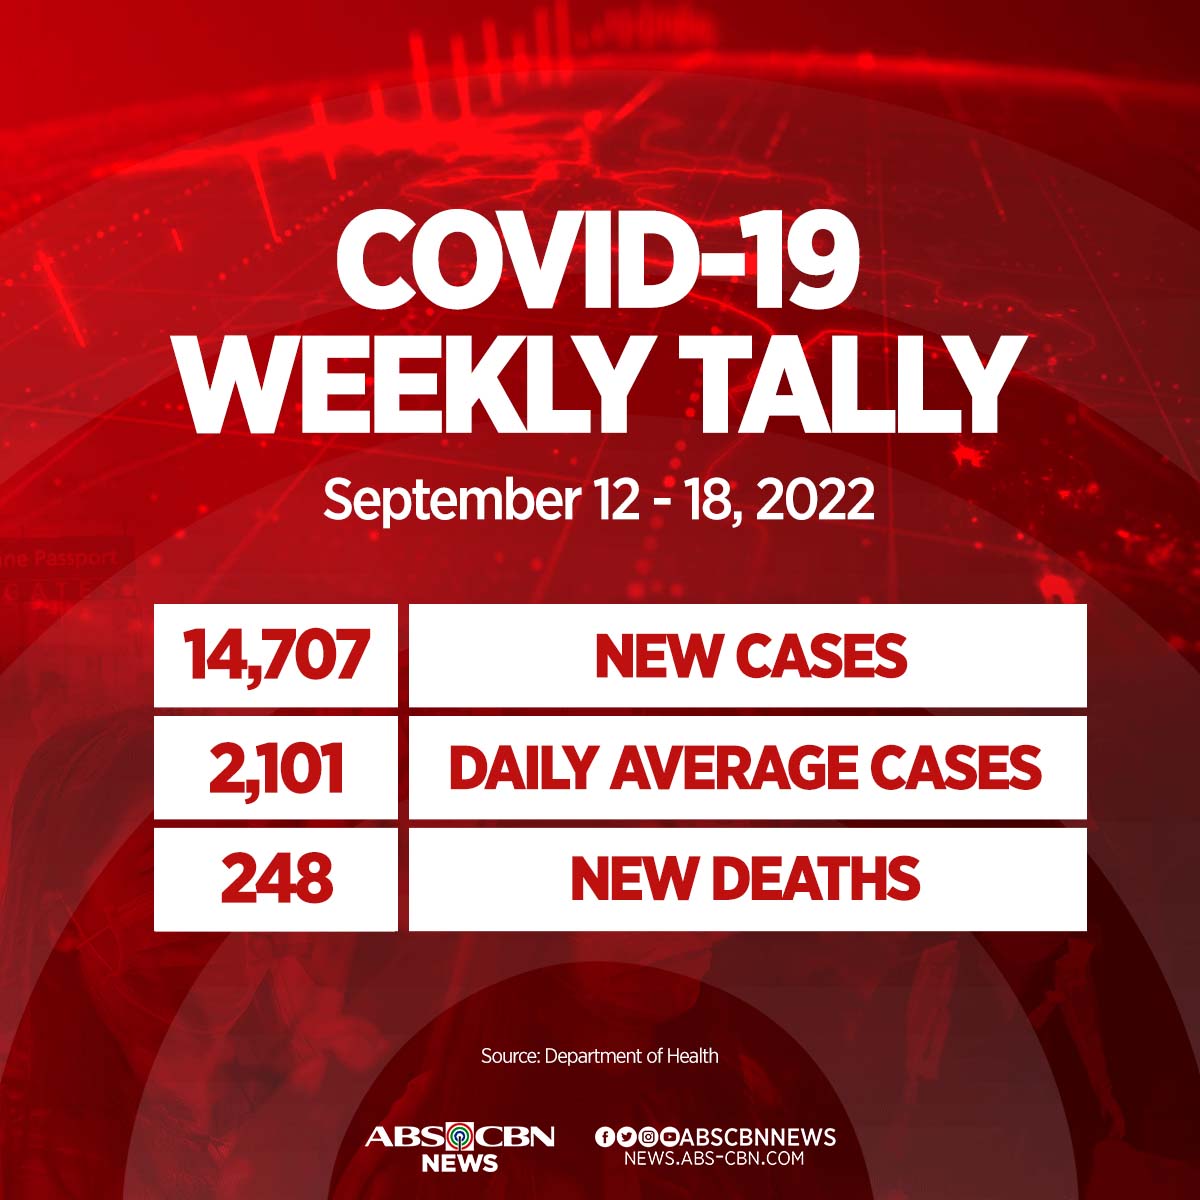 PH logs 14,707 new COVID-19 cases or an average of 2,101 daily cases from September 12-18.

248 deaths verified in the past week

772 severely, critically ill in hospitals
ICU bed utilization rate at 24.1%
non-ICU bed utilization rate at 28.9%

news.abs-cbn.com/covid19-watch